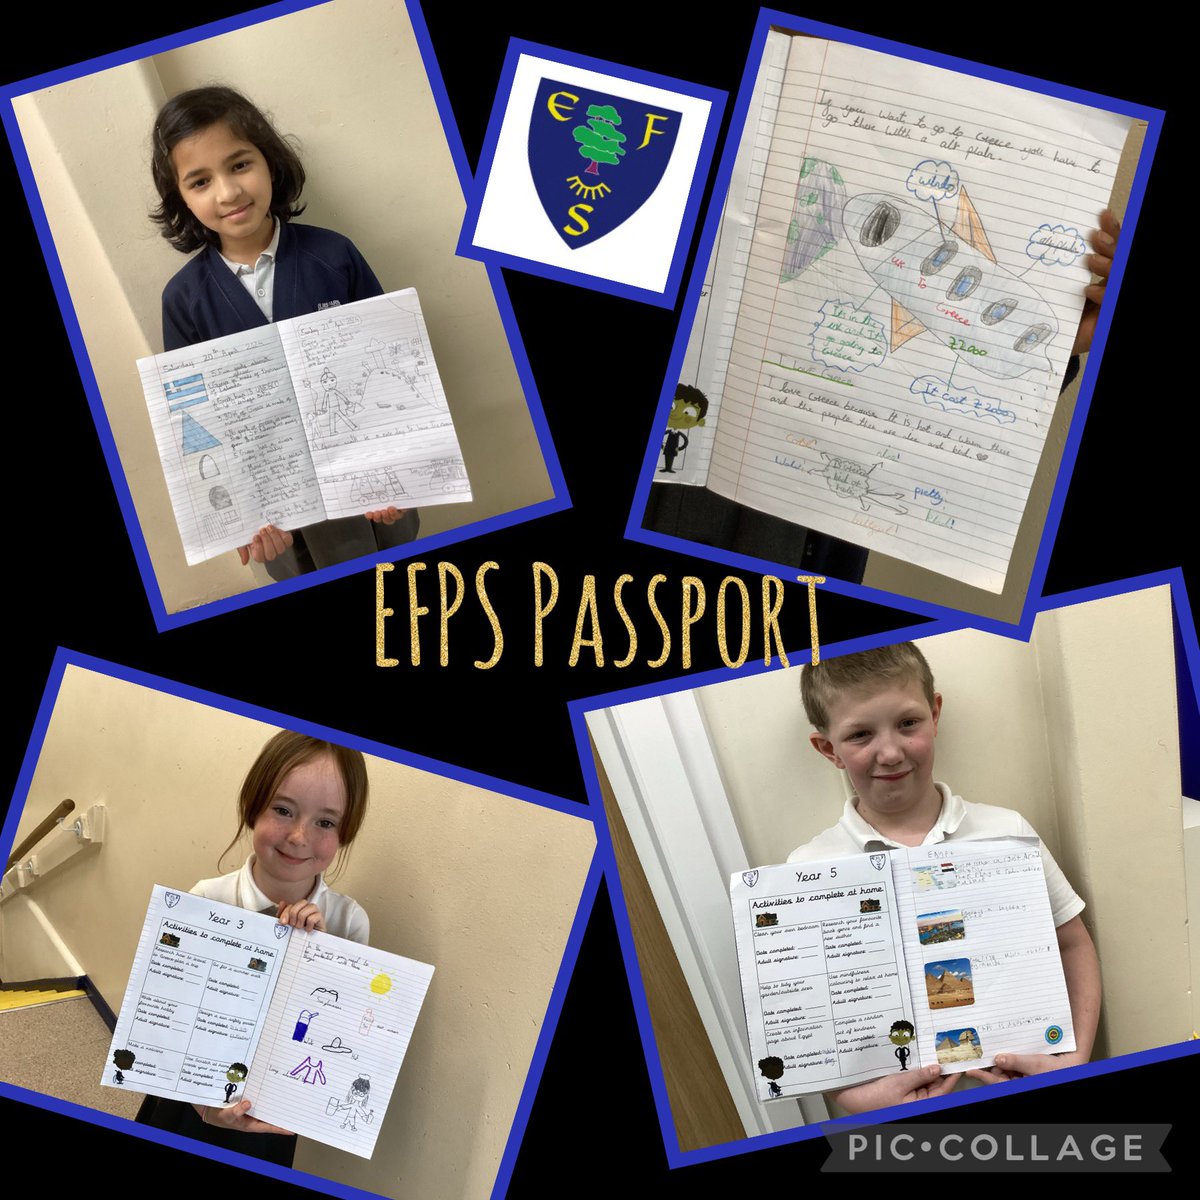 Pupils have made an excellent start to their EFPS Passport home challenges. They are enriching their knowledge of the school curriculum and learning life skills. #enrichment #ambition @BEPvoice